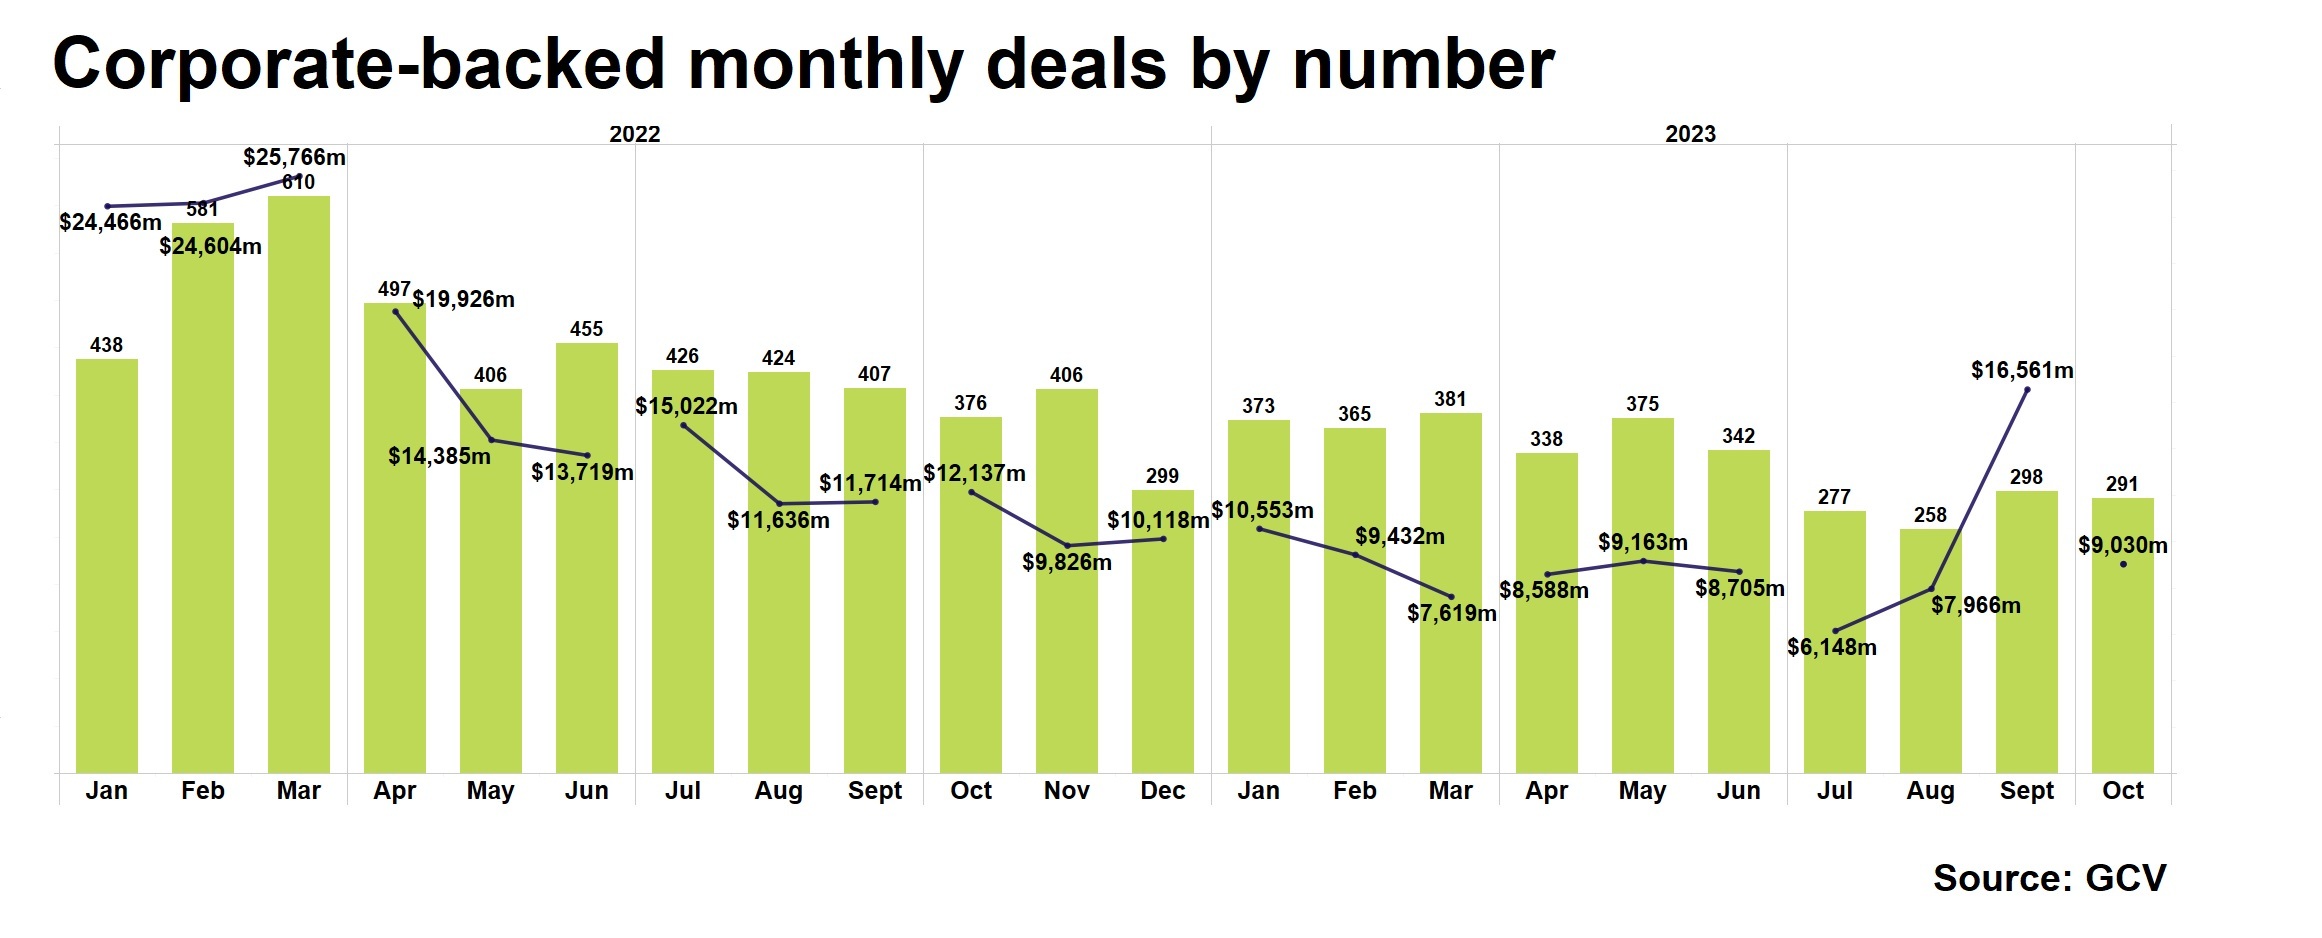 corporate-backed monthly deals by number